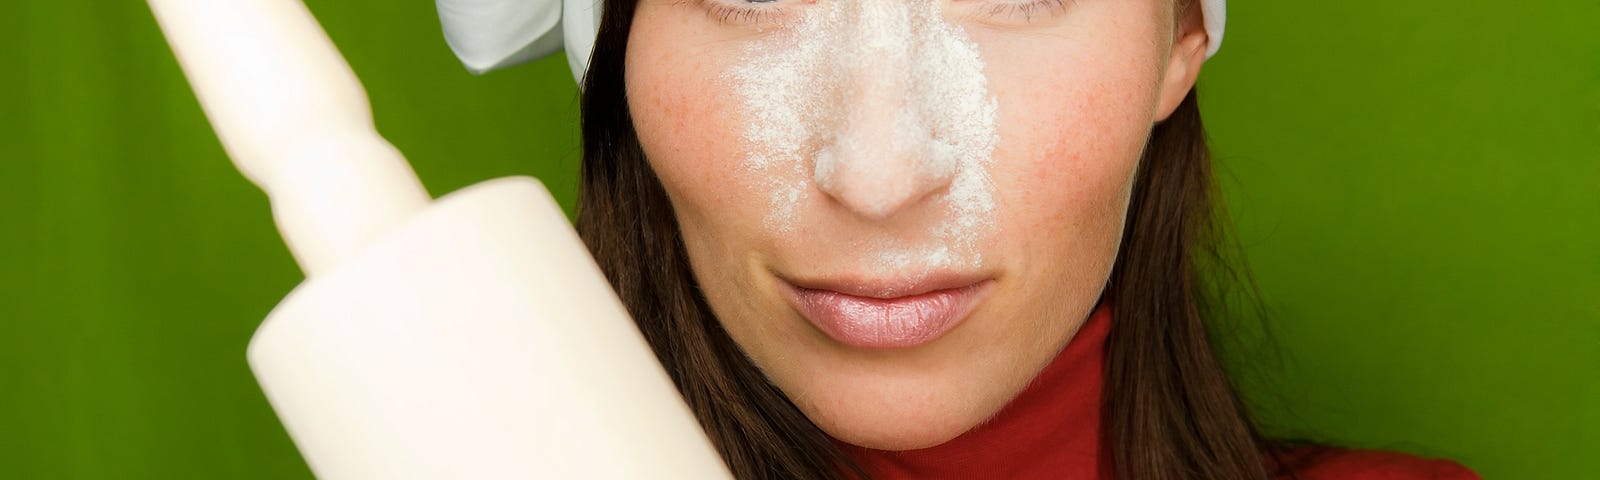 Woman with flour on face holding a rolling pin.